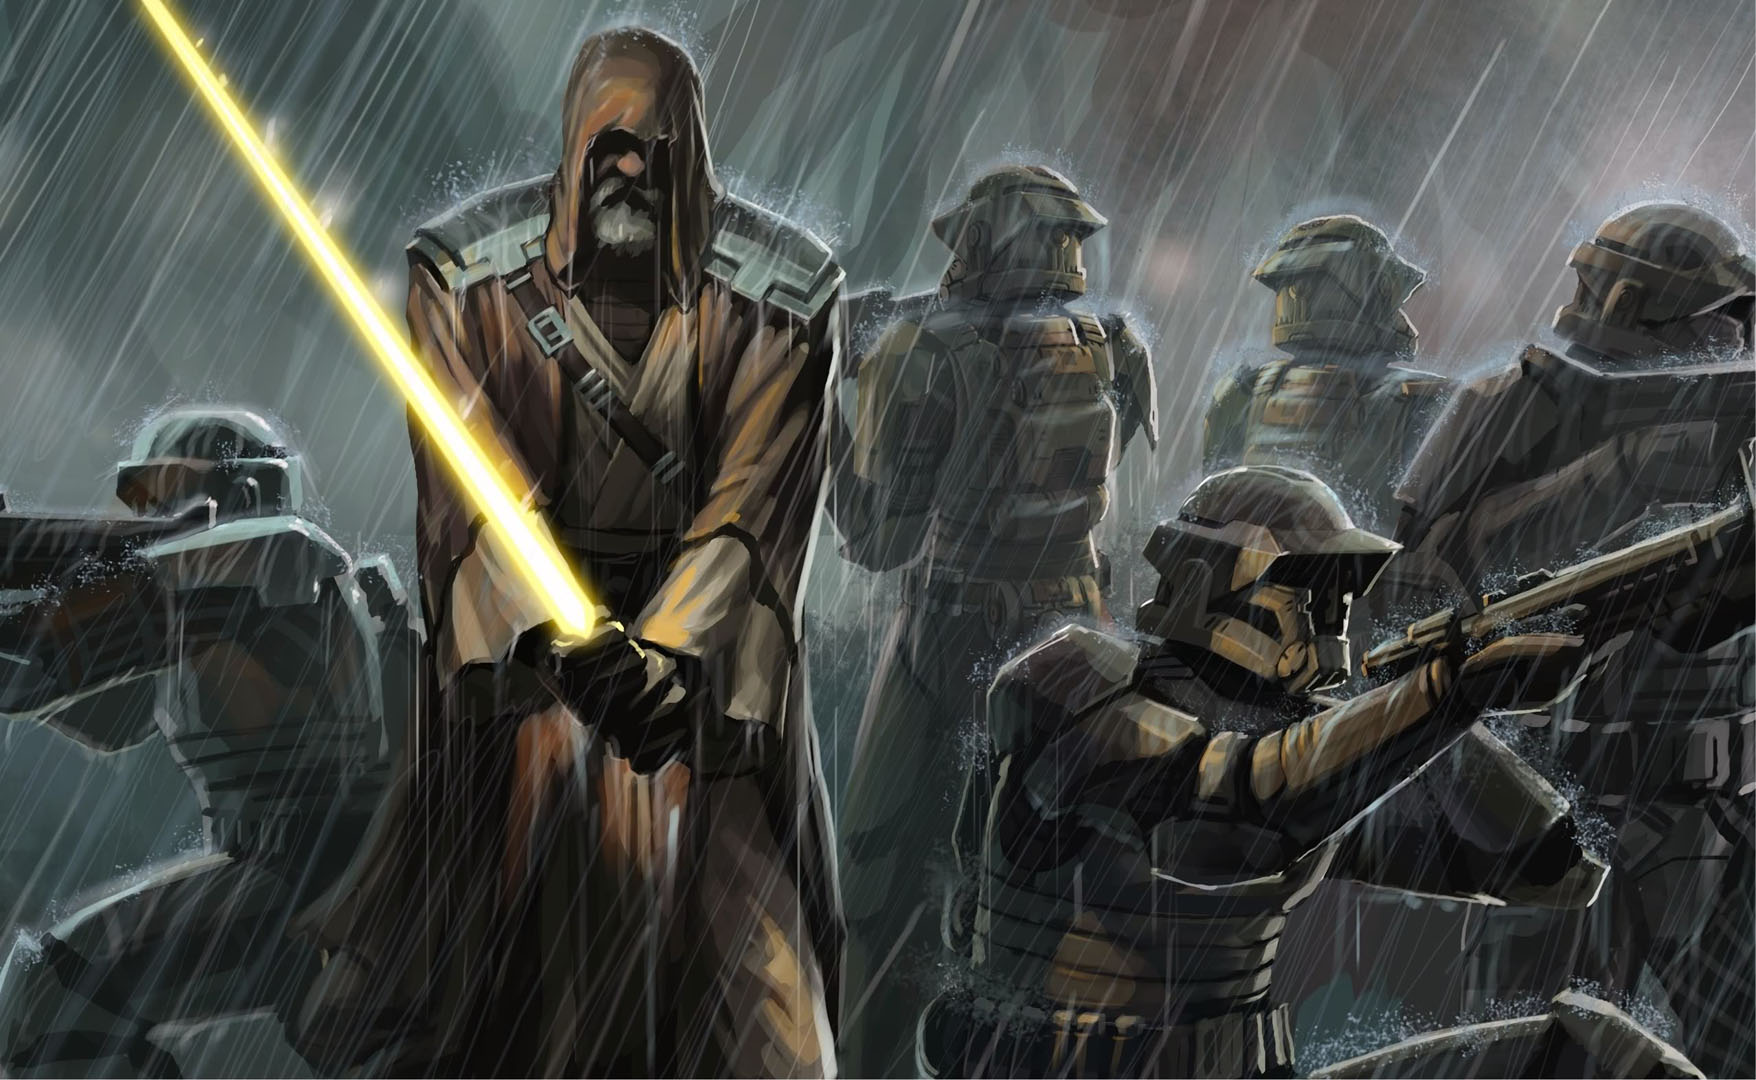 In The Rain Action Games Wallpaper Image Featuring Star Wars